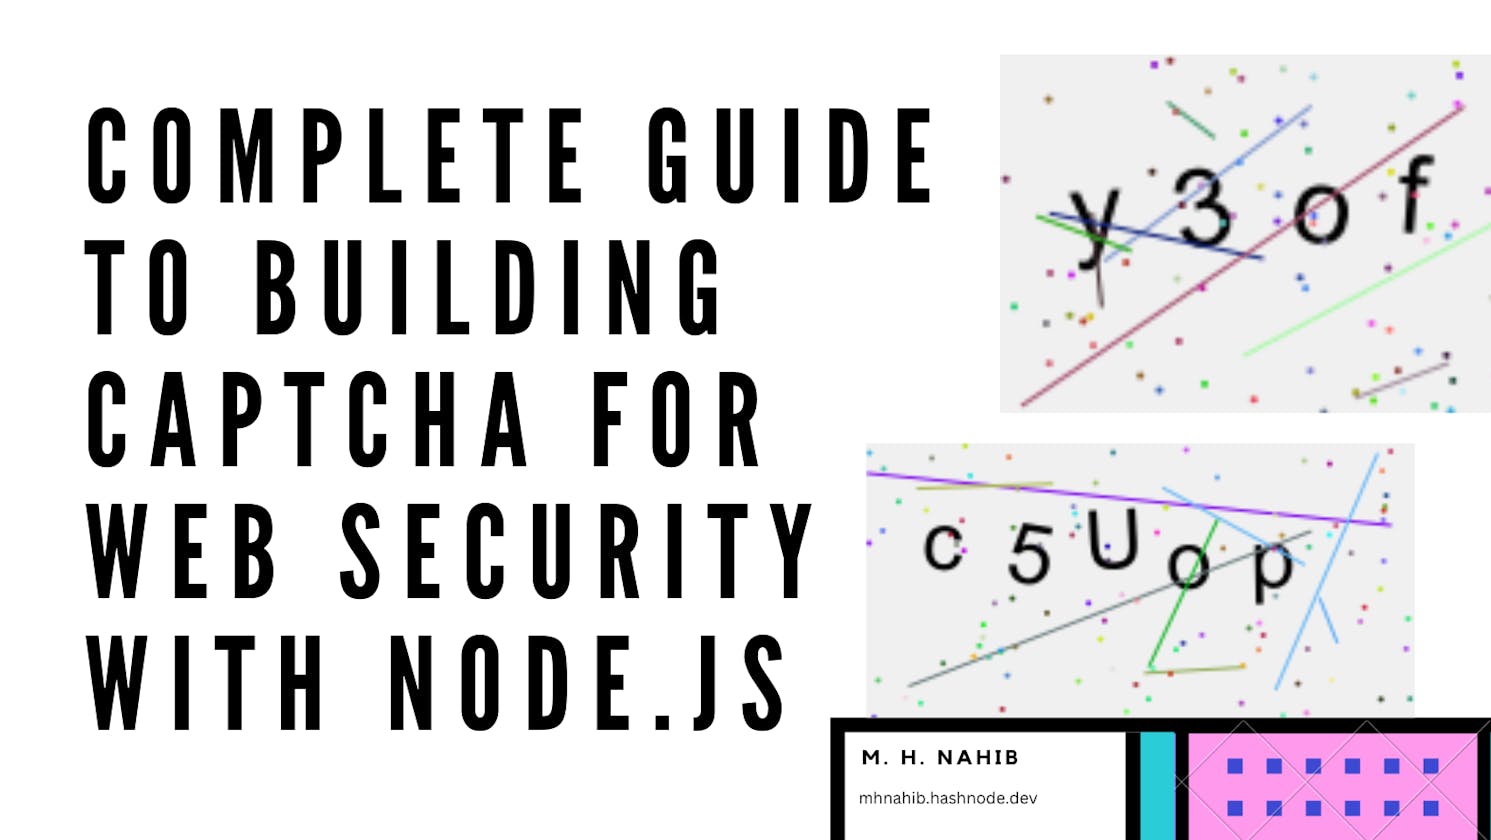 Complete Guide to Building CAPTCHA for Web Security with Node.js